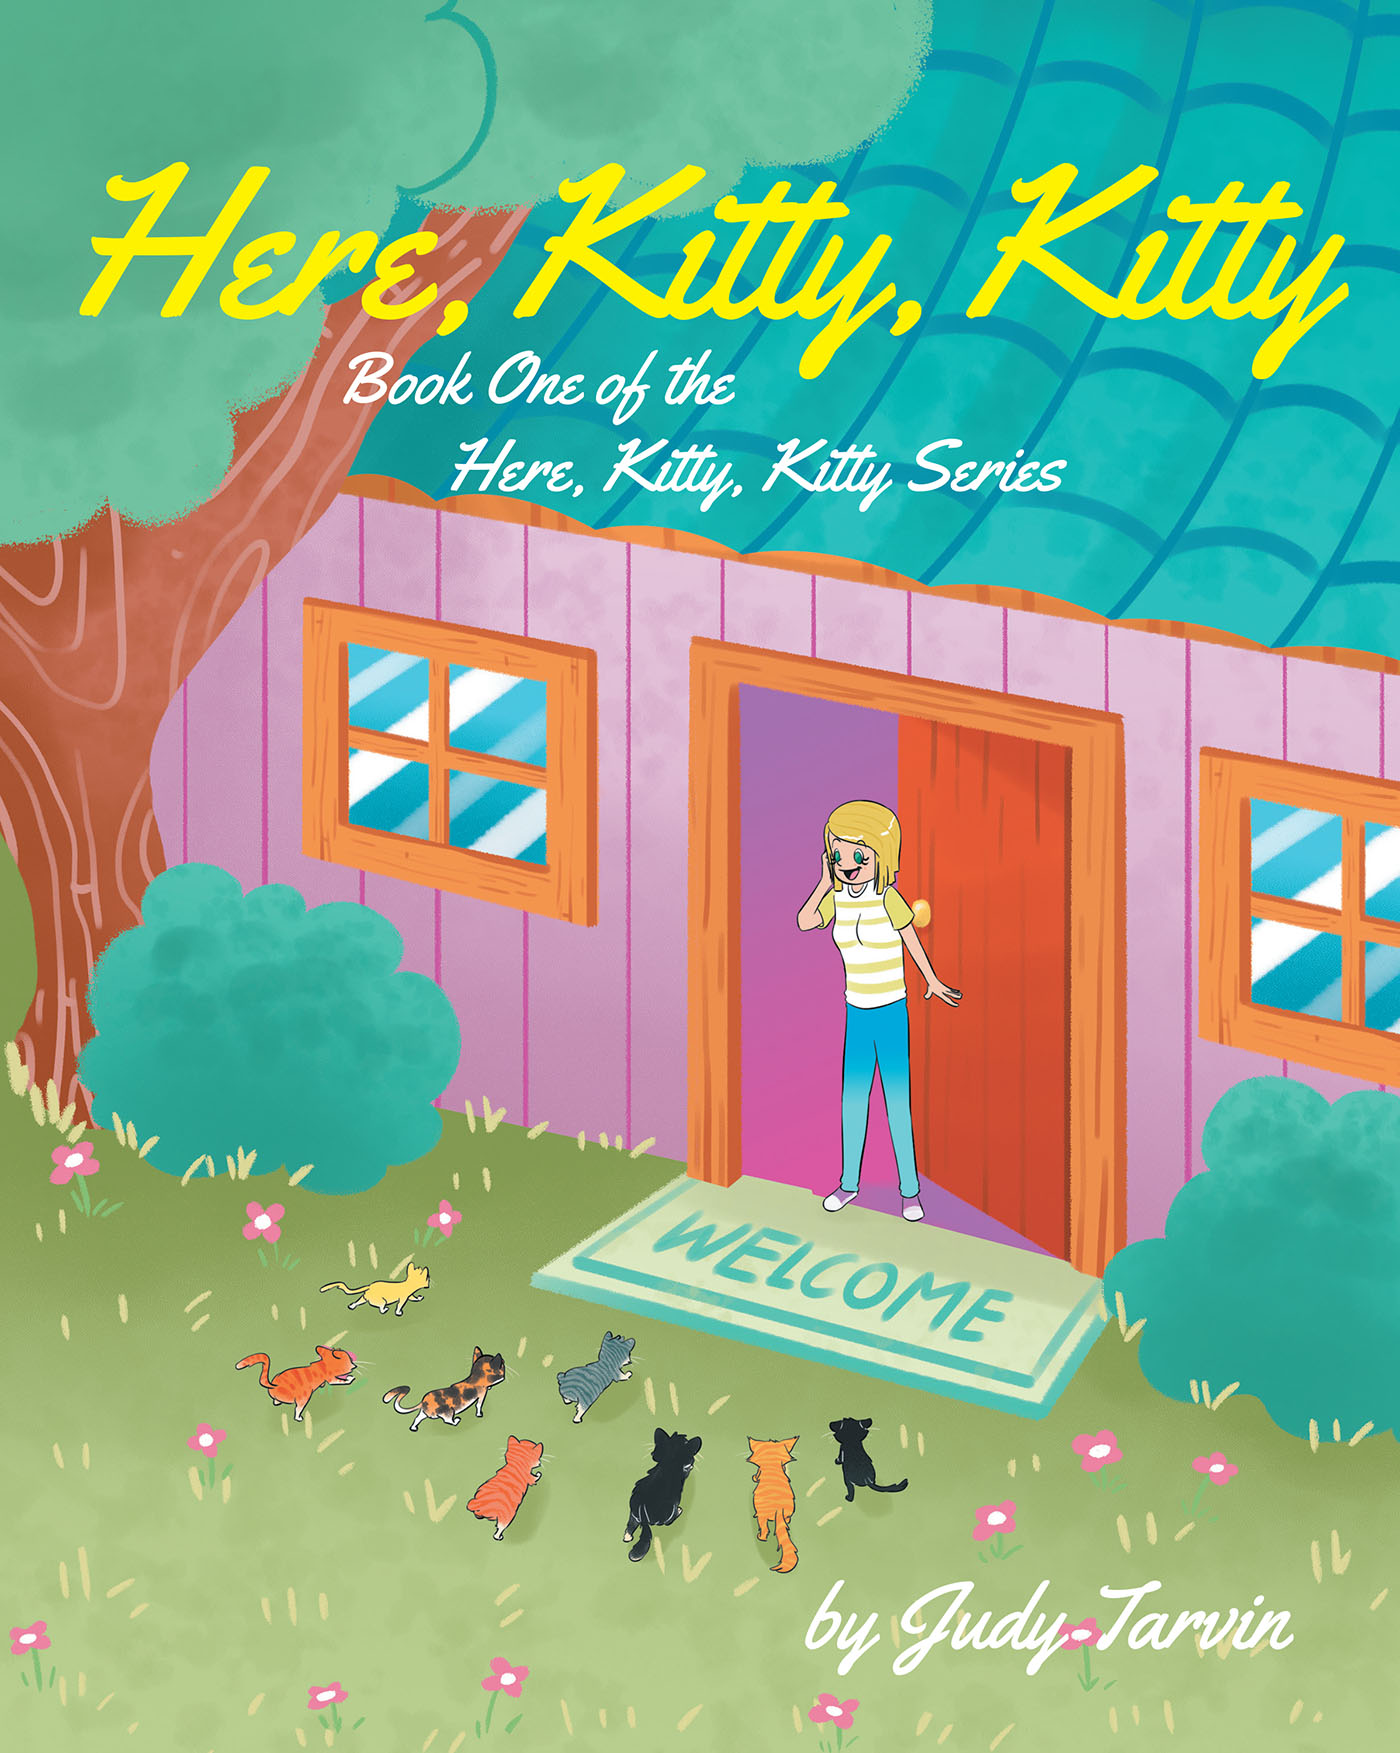 Author Judy Tarvin’s New Book, "Here, Kitty, Kitty: Book One of the Here, Kitty, Kitty Series," is a Collection of Enjoyable Short Stories for Readers of All Ages